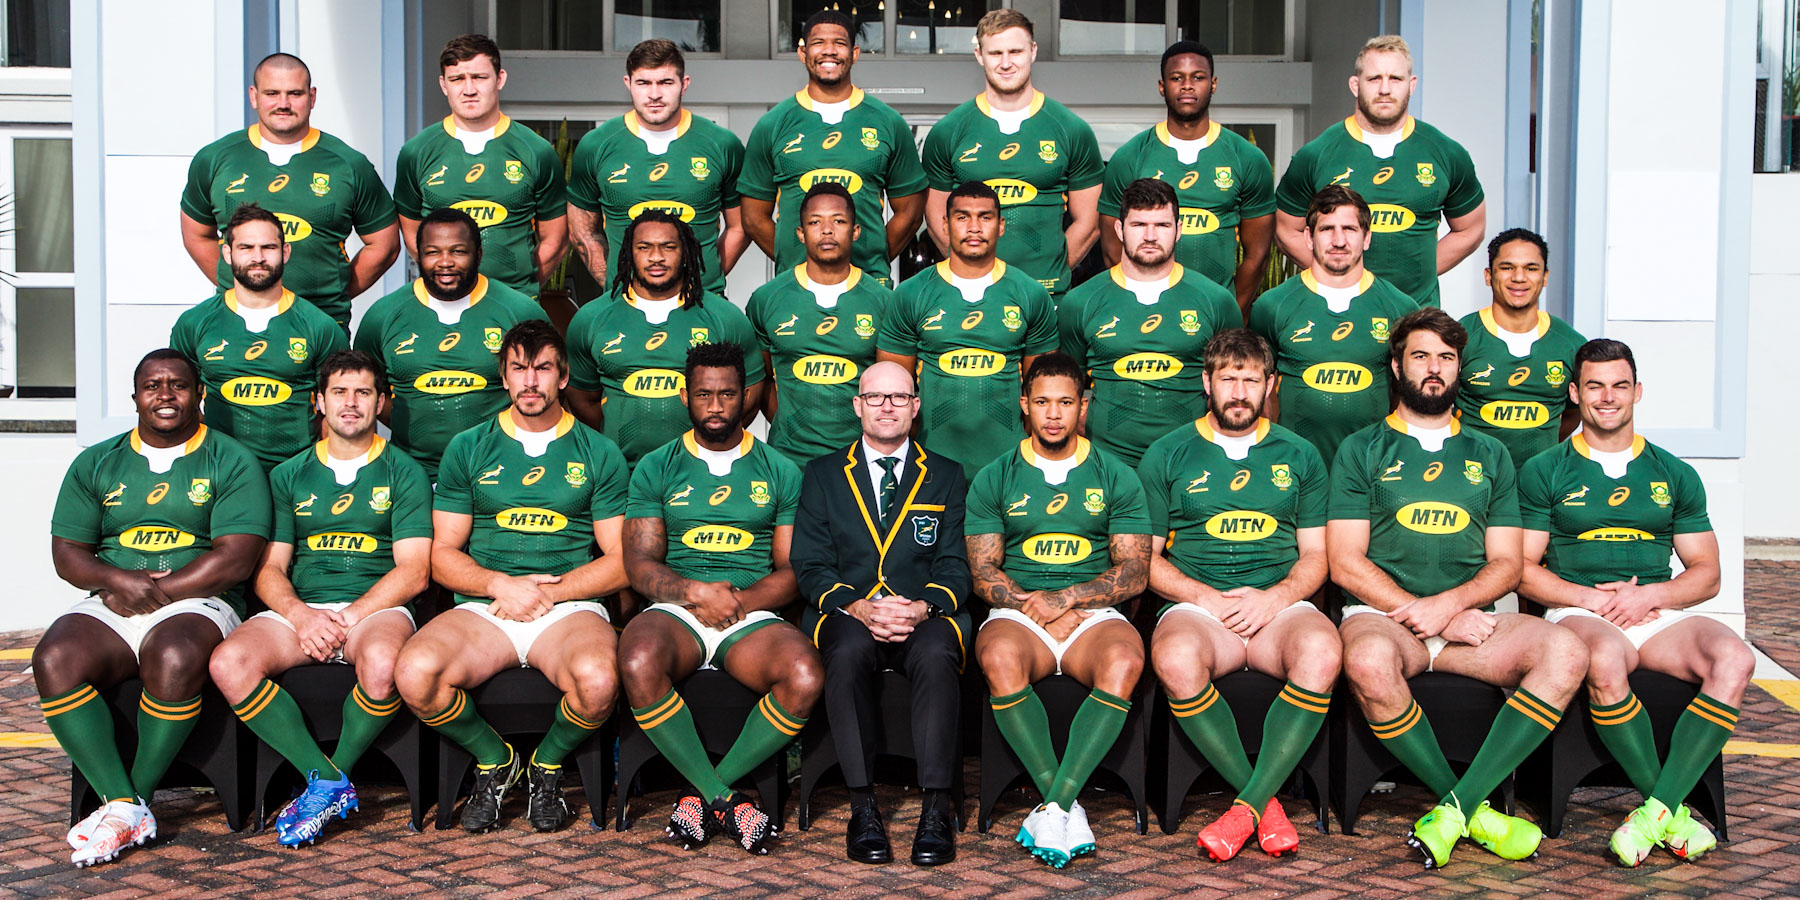 The last time Morne Steyn appeared on a Springbok team photo - 13 August 2021, before the first Test against Argentina in Port Elizabeth.